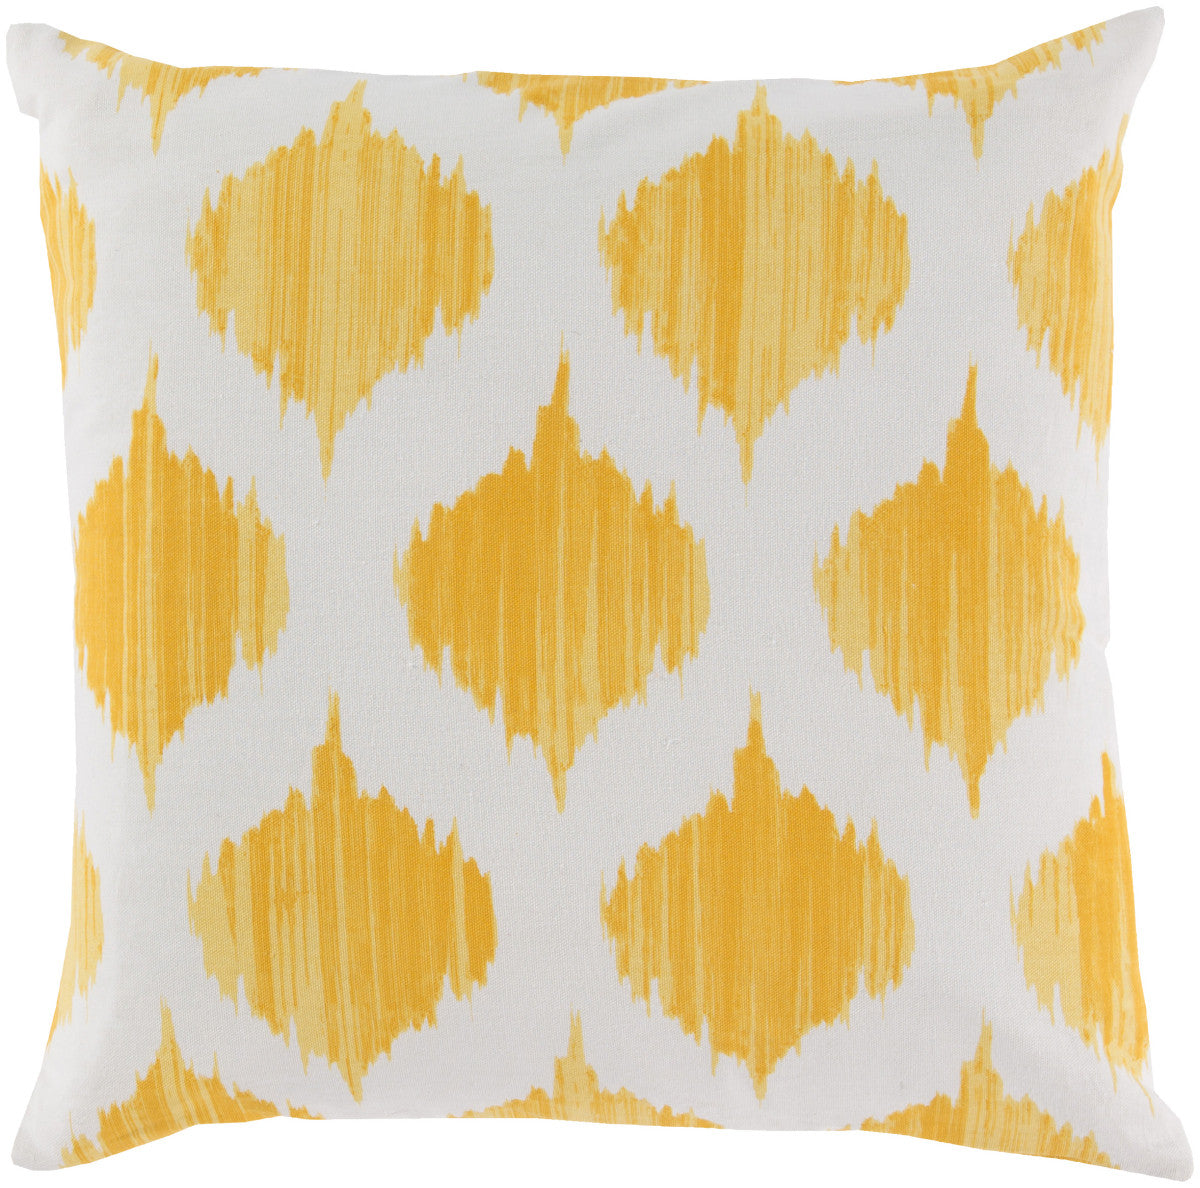 Surya Ogee Exquisite in Ikat SY-020 Pillow